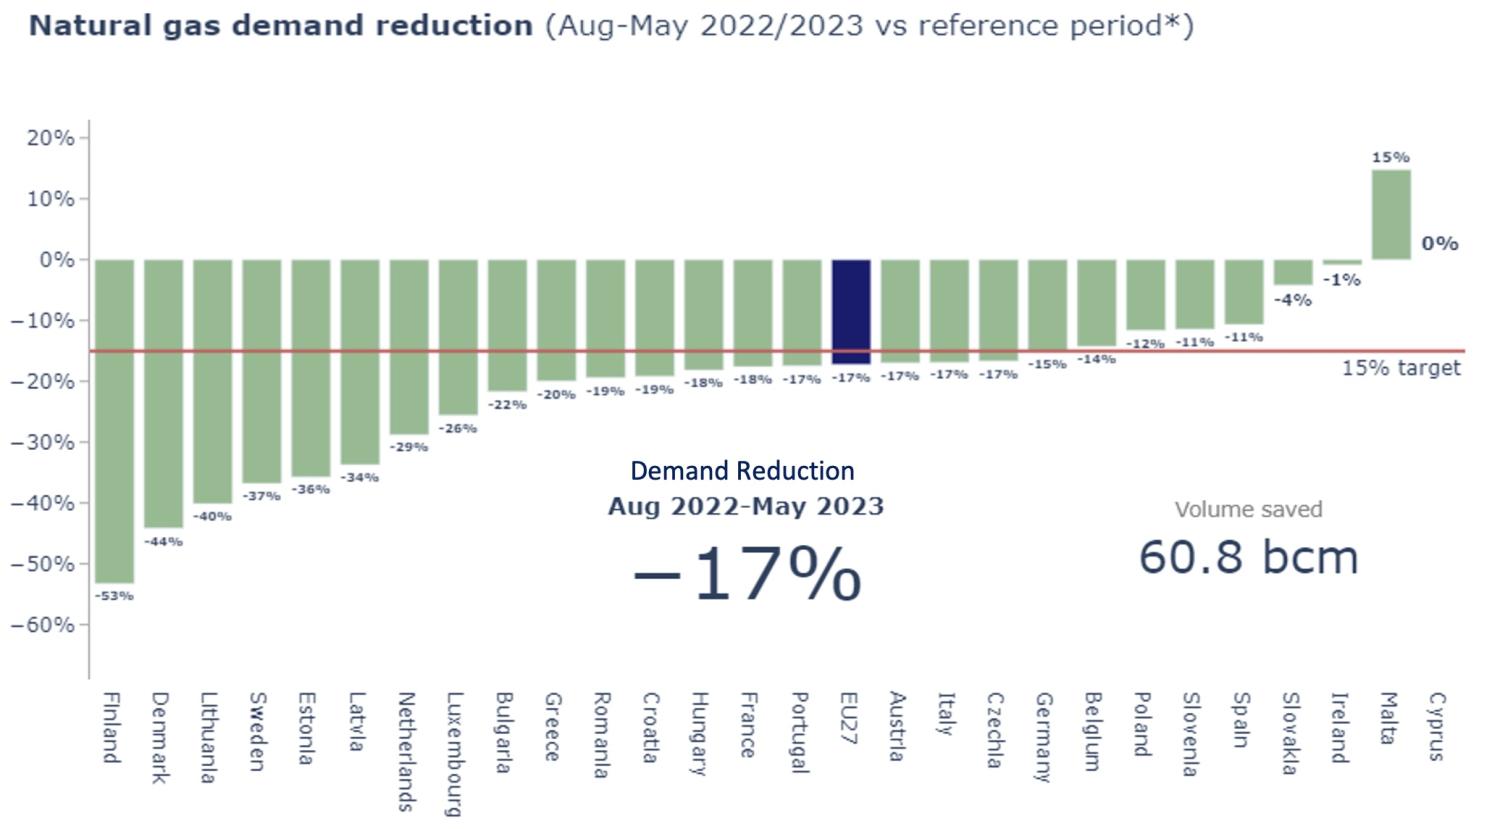 Figure 6 Natural gas demand reduction in Europe: Overshooting the 15% voluntary consumption reduction target